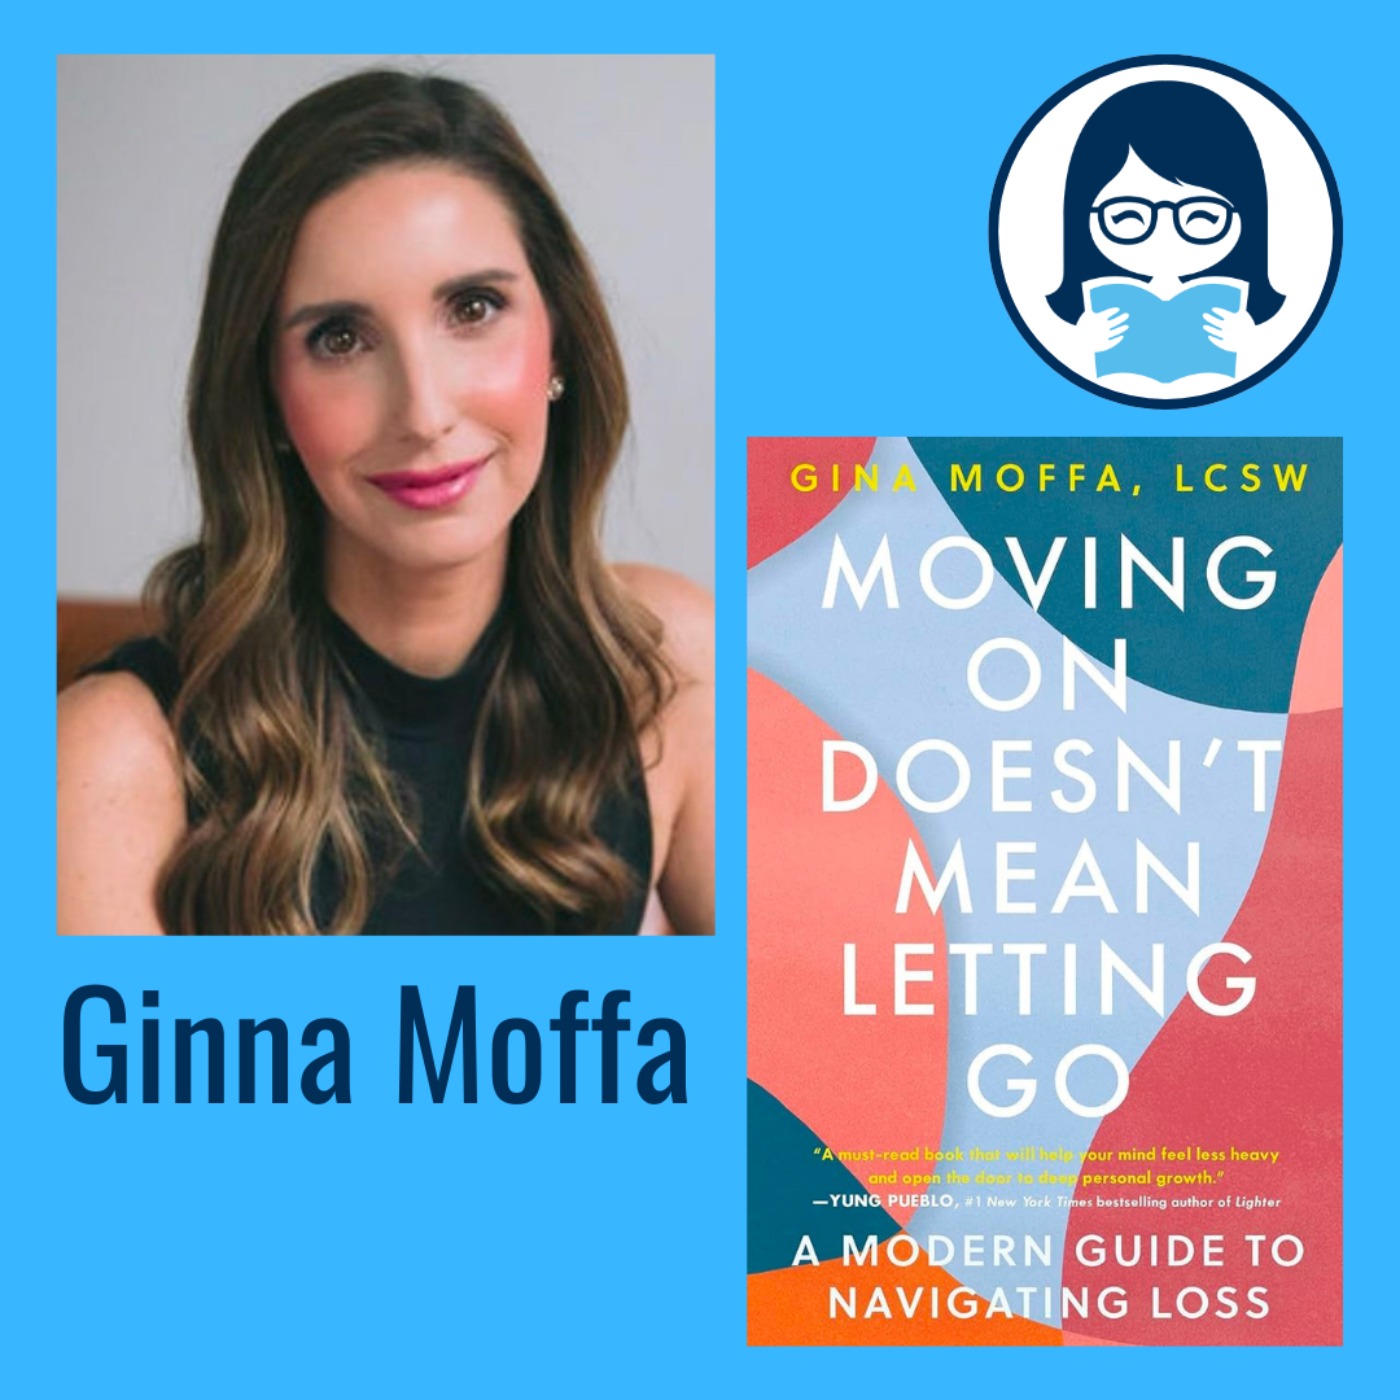 Gina Moffa, MOVING ON DOESN'T MEAN LETTING GO: A Modern Guide to Navigating Loss